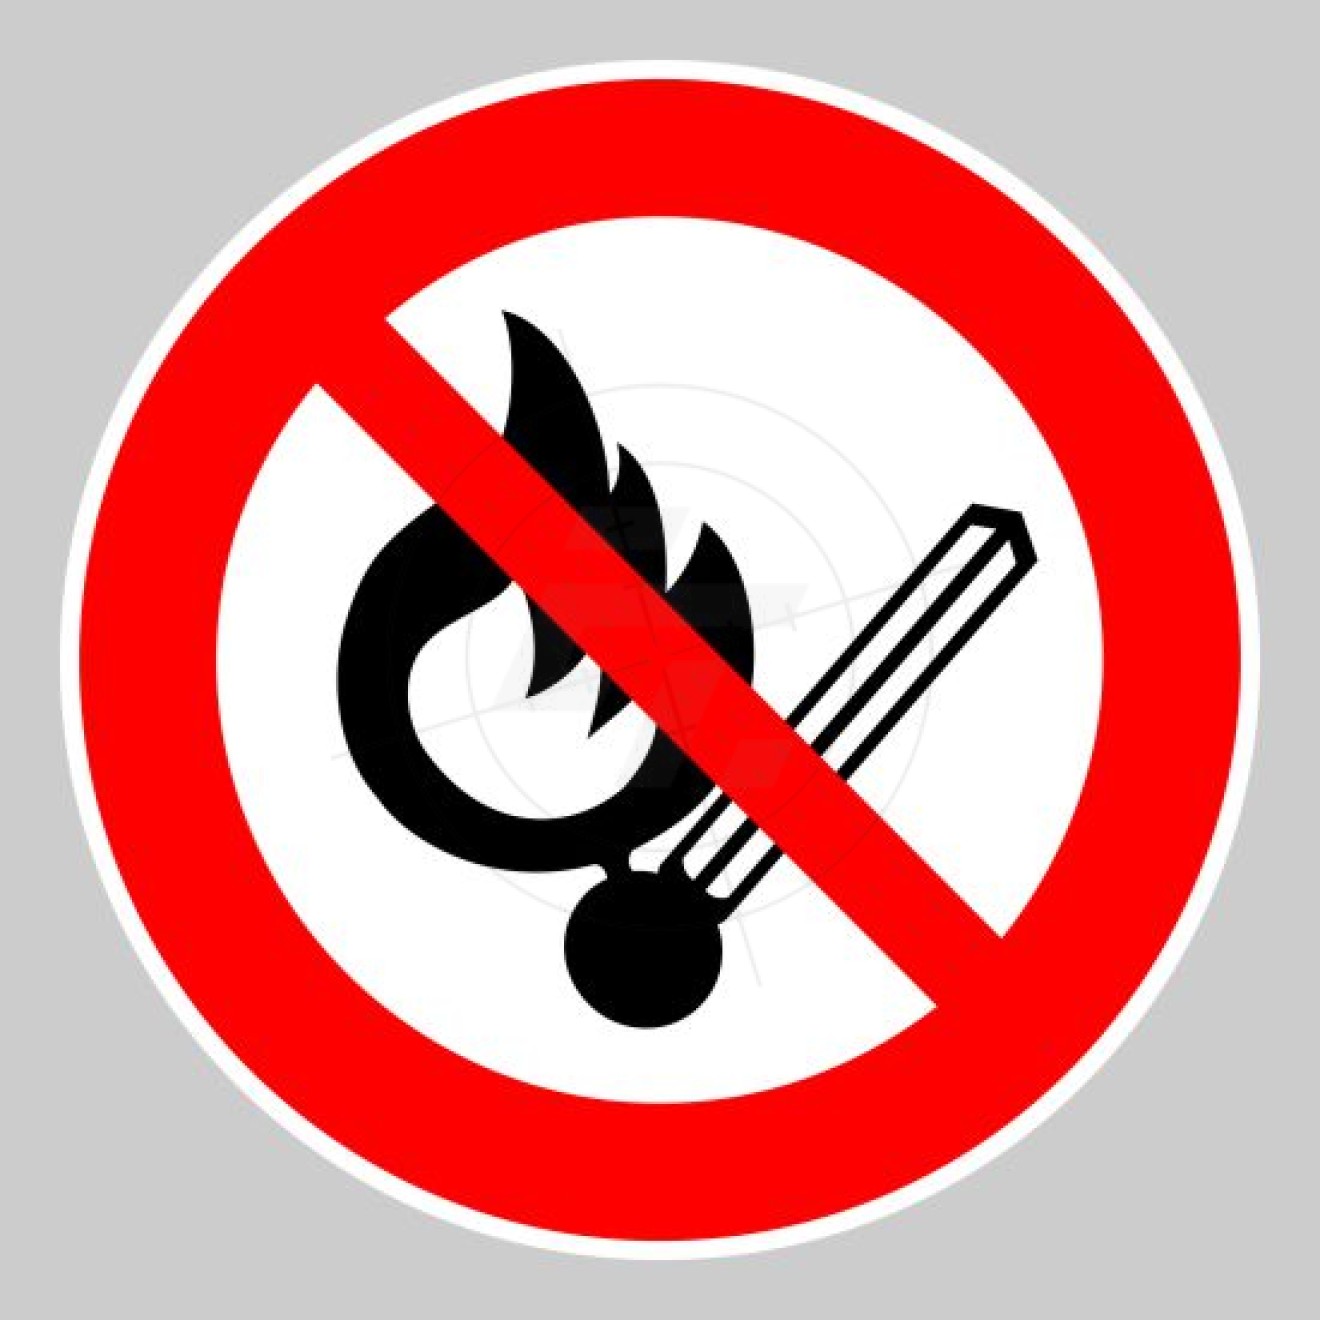 open fire prohibited